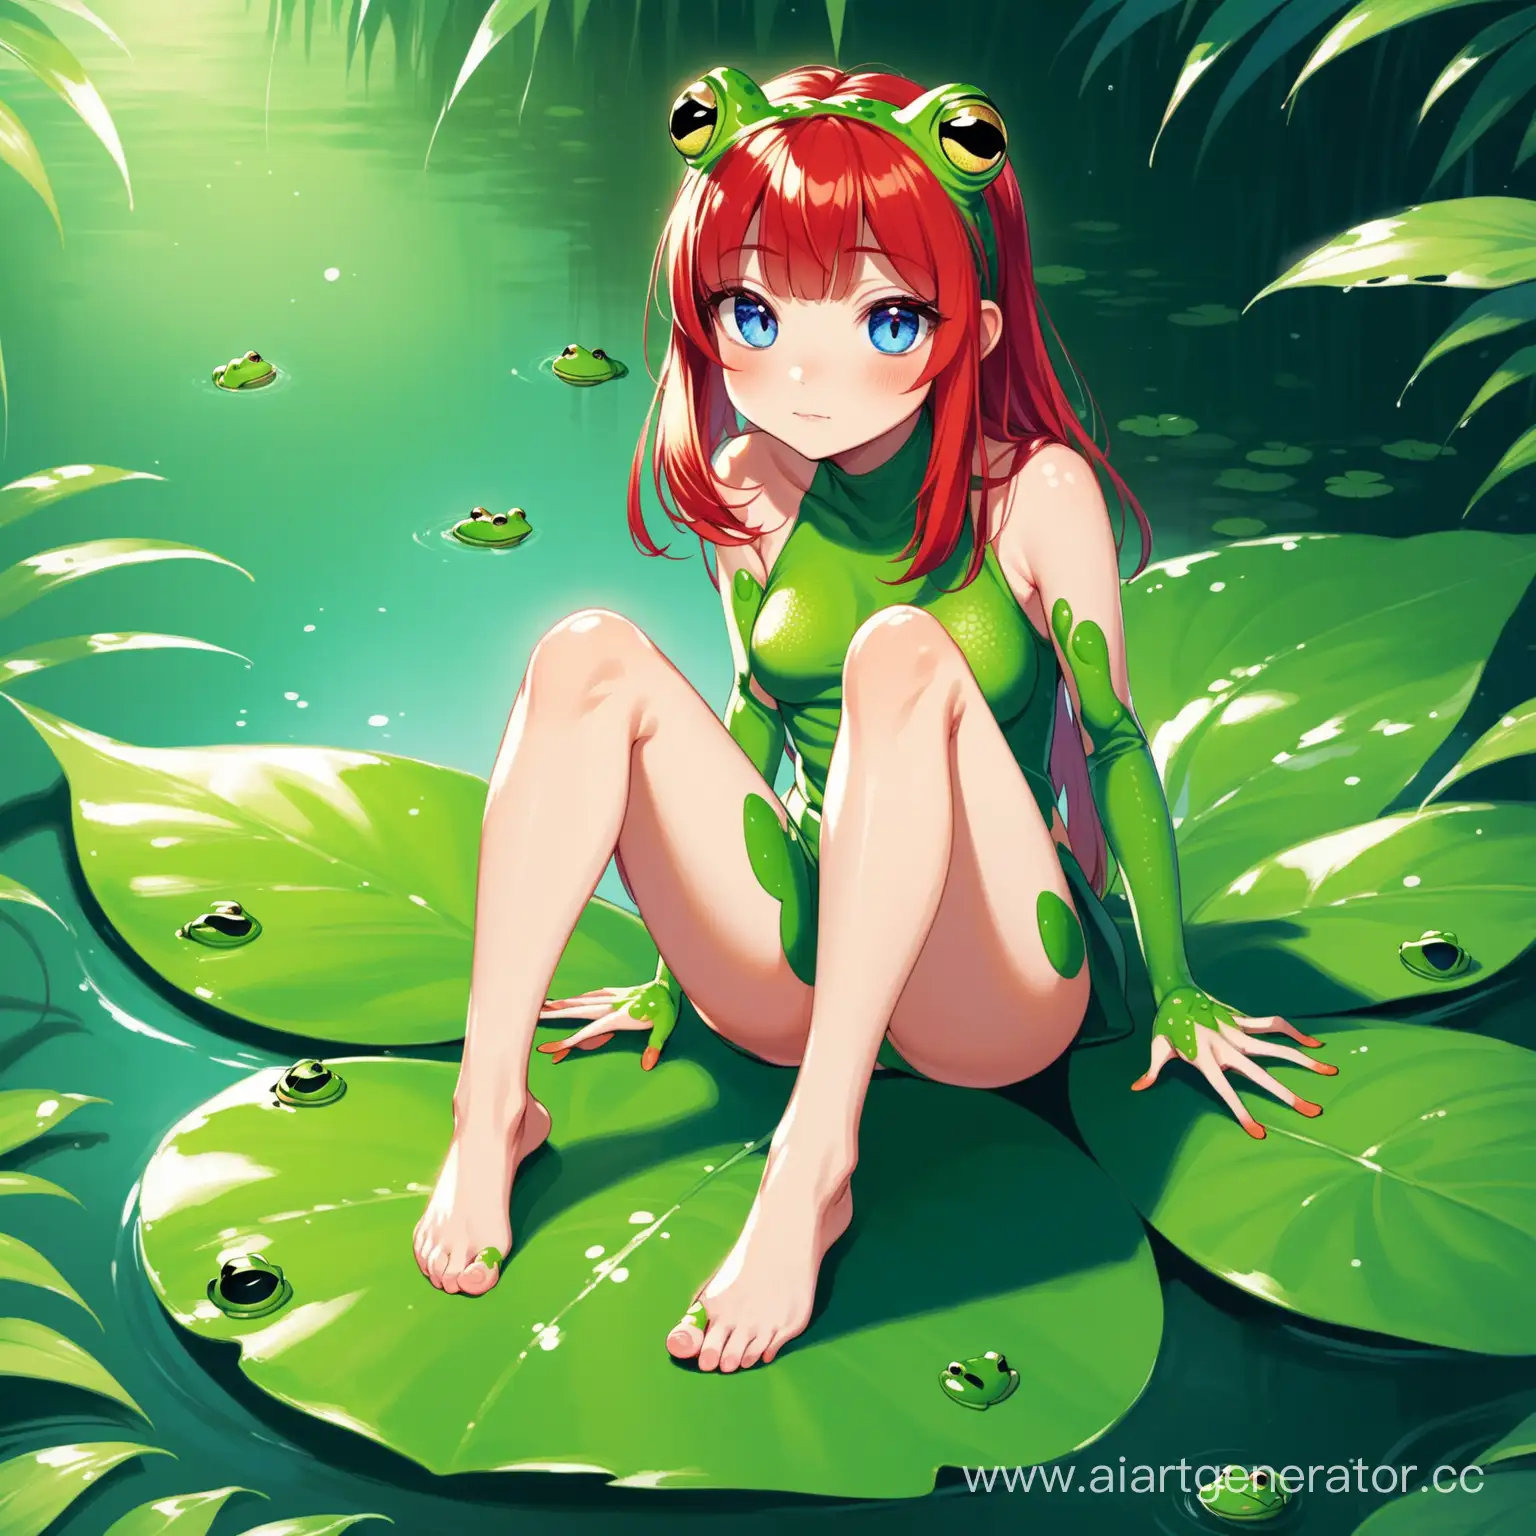 Frog-Girl-with-Red-Hair-and-Blue-Eyes-Sitting-on-Leaf